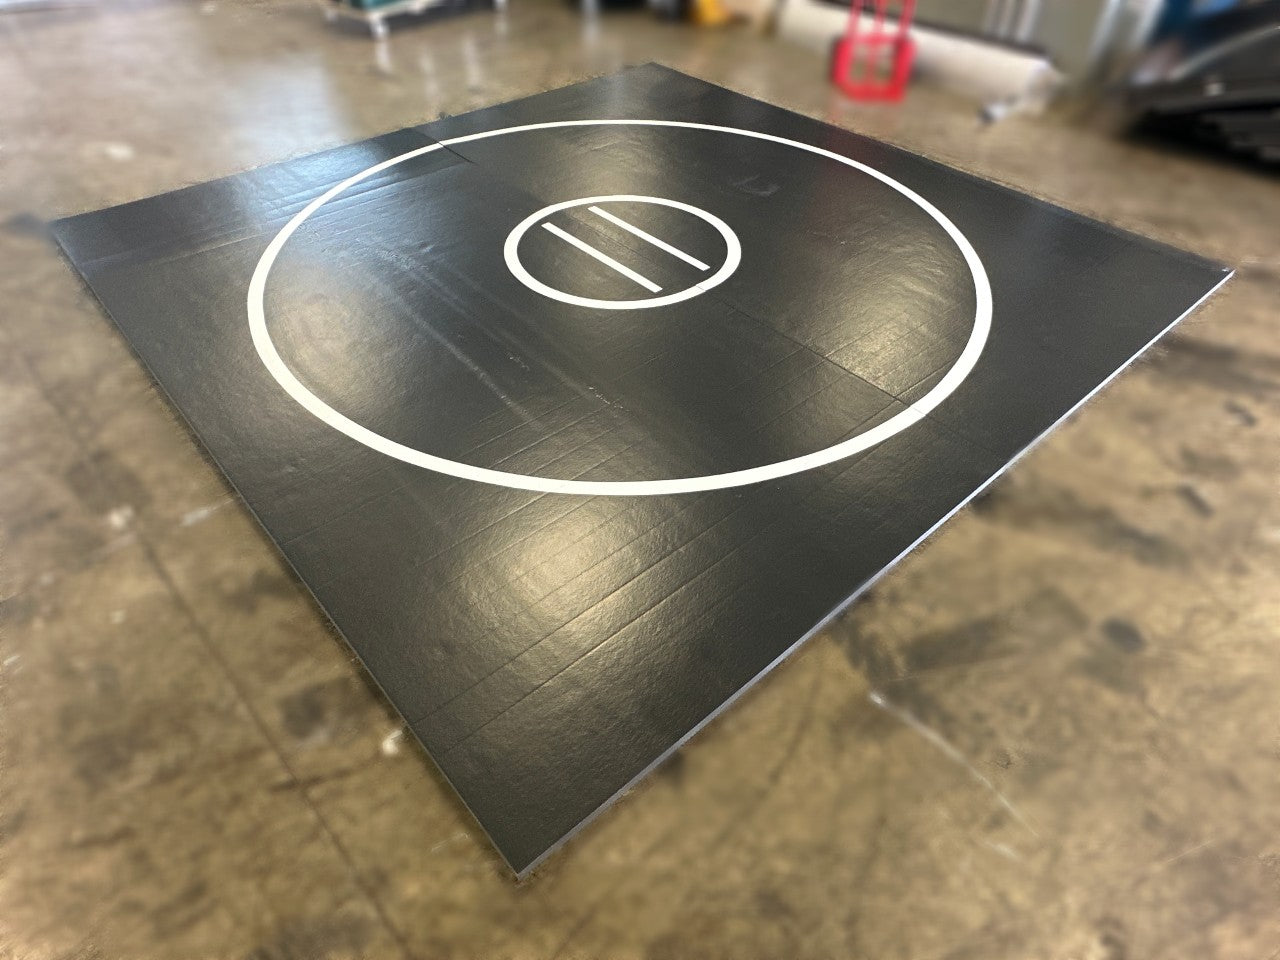 Clearance Wrestling Mat 12' x 12' x 1 3/8" Roll-Up Mat Black with White Circles-slightly damaged